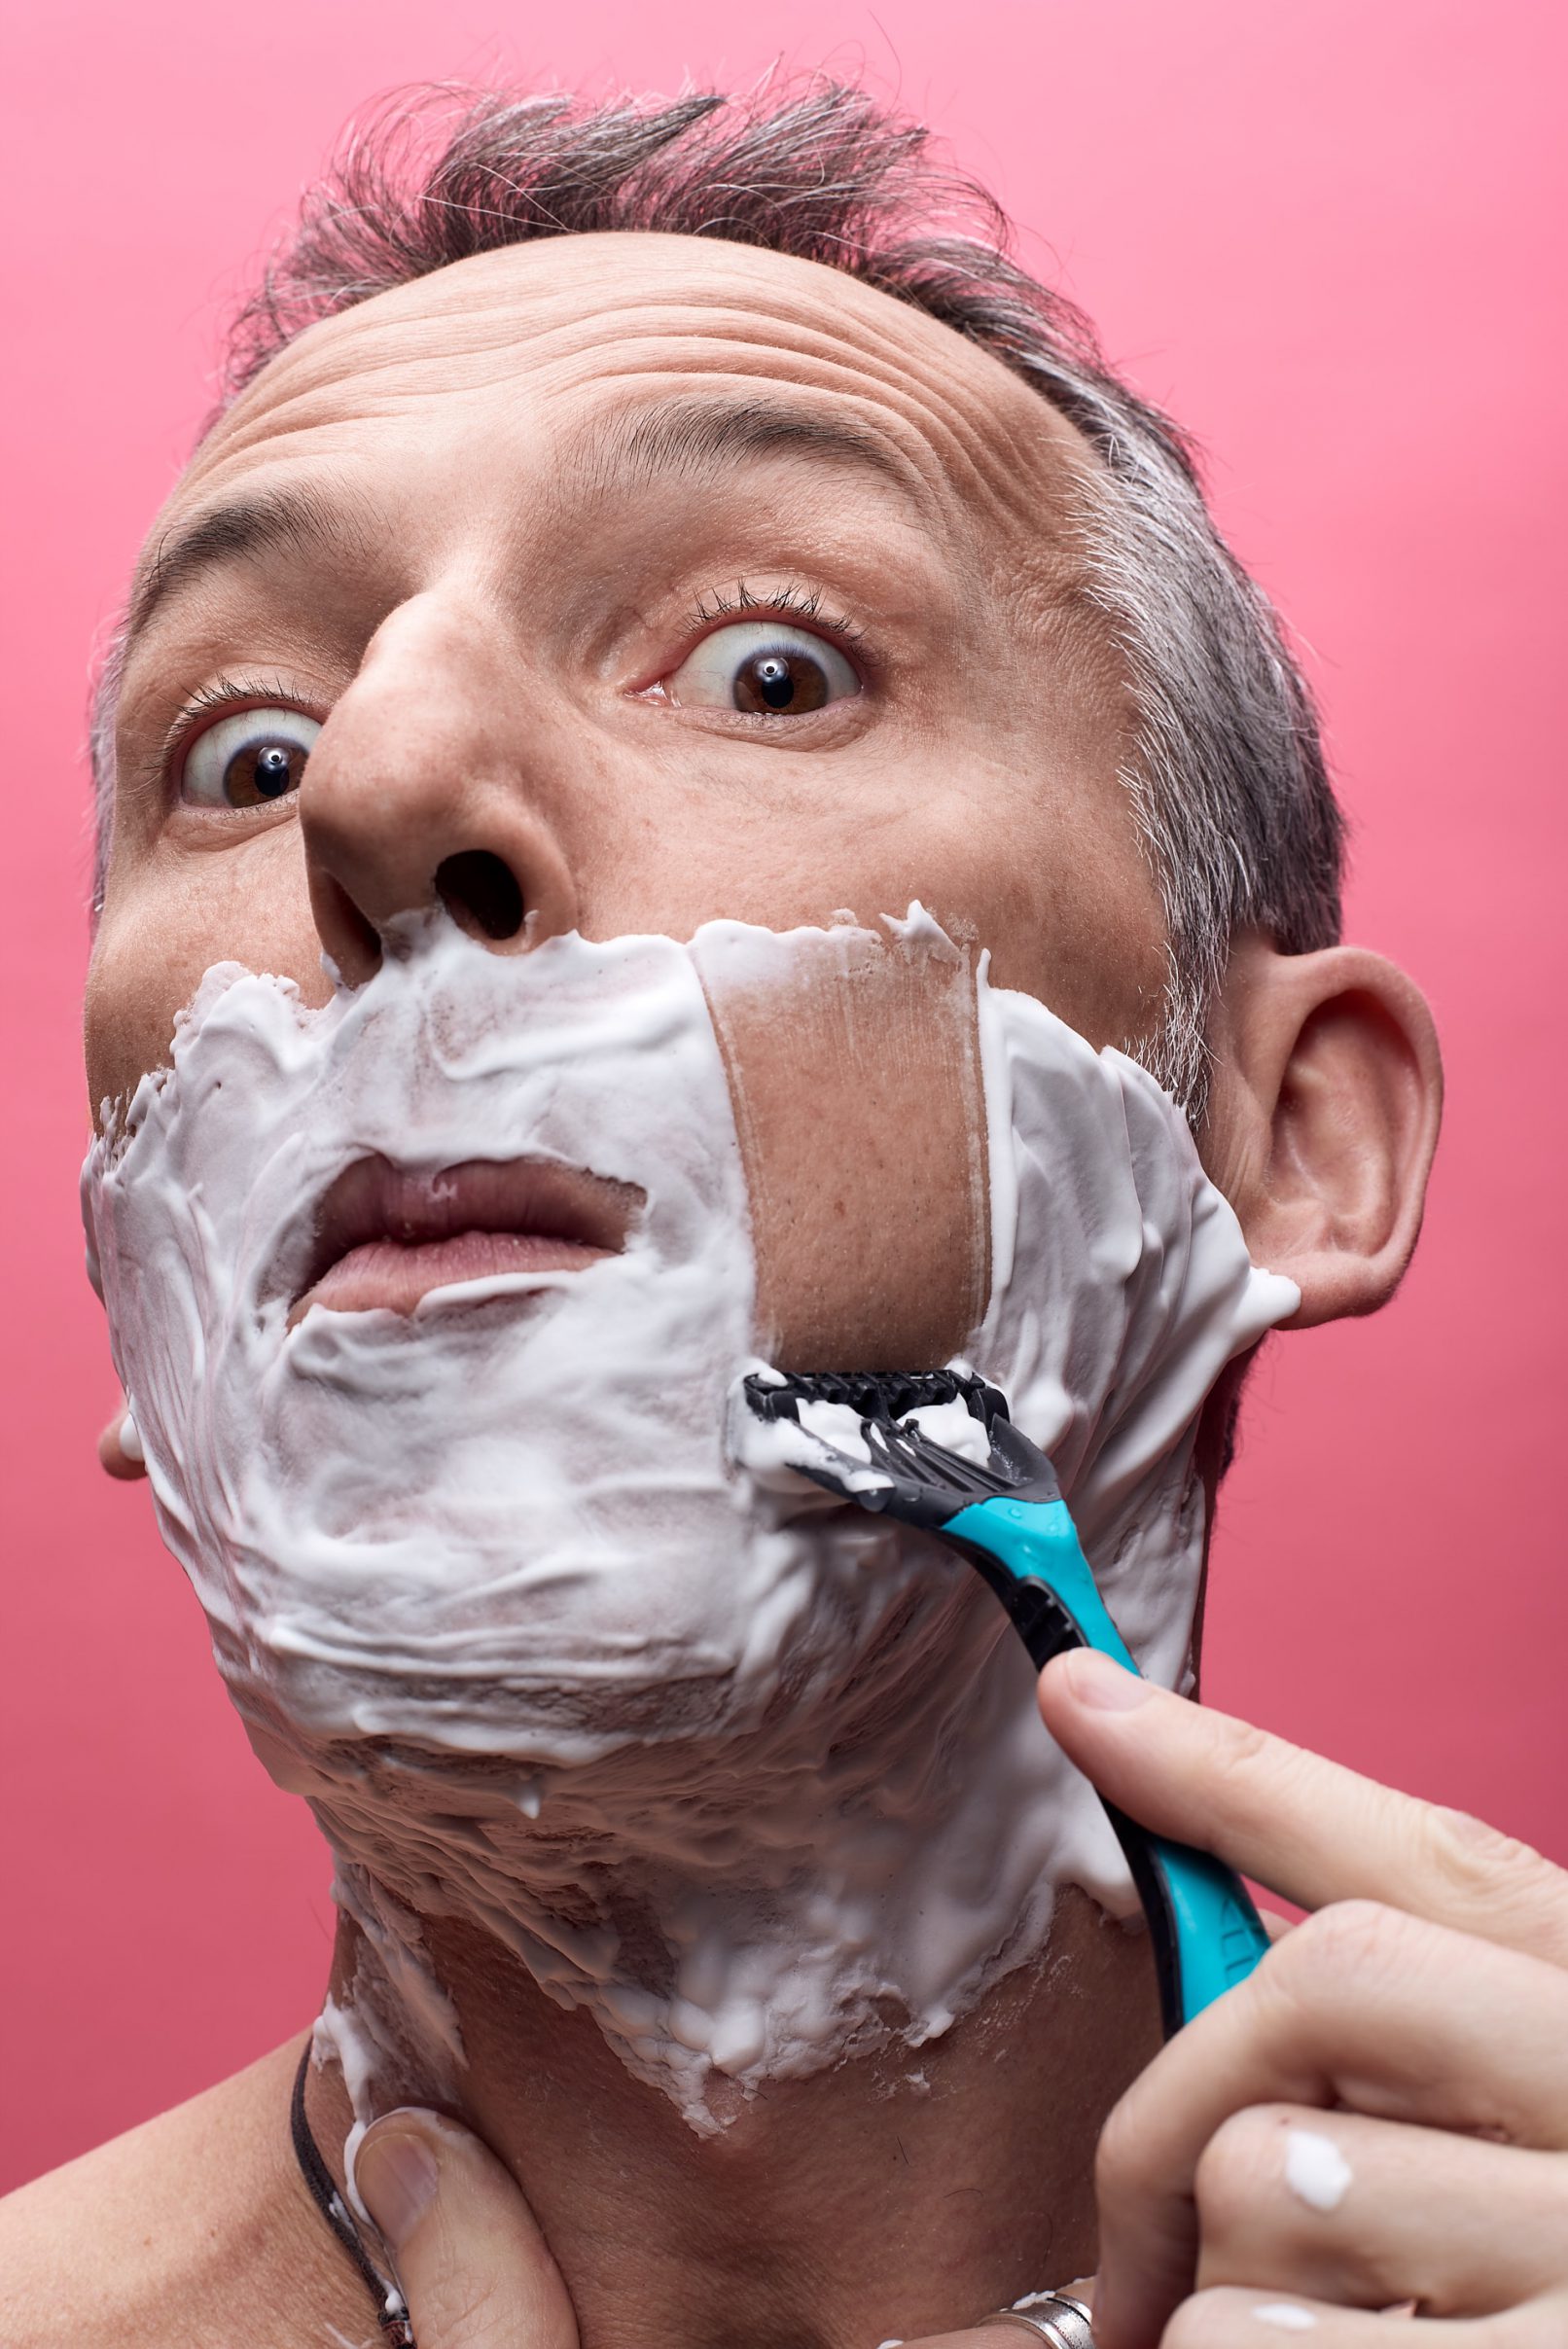 self-portrait of photographer David Umberto Zappa showing him ironically while shaving. David Umberto Zappa is a commercial, advertising and editorial photographer based in Italy. Autoritratto di David Umberto Zappa, ironico mentre si rasa. David Umberto Zappa é un fotografo commerciale, pubblicitario ed editoriale con sede in Italia.